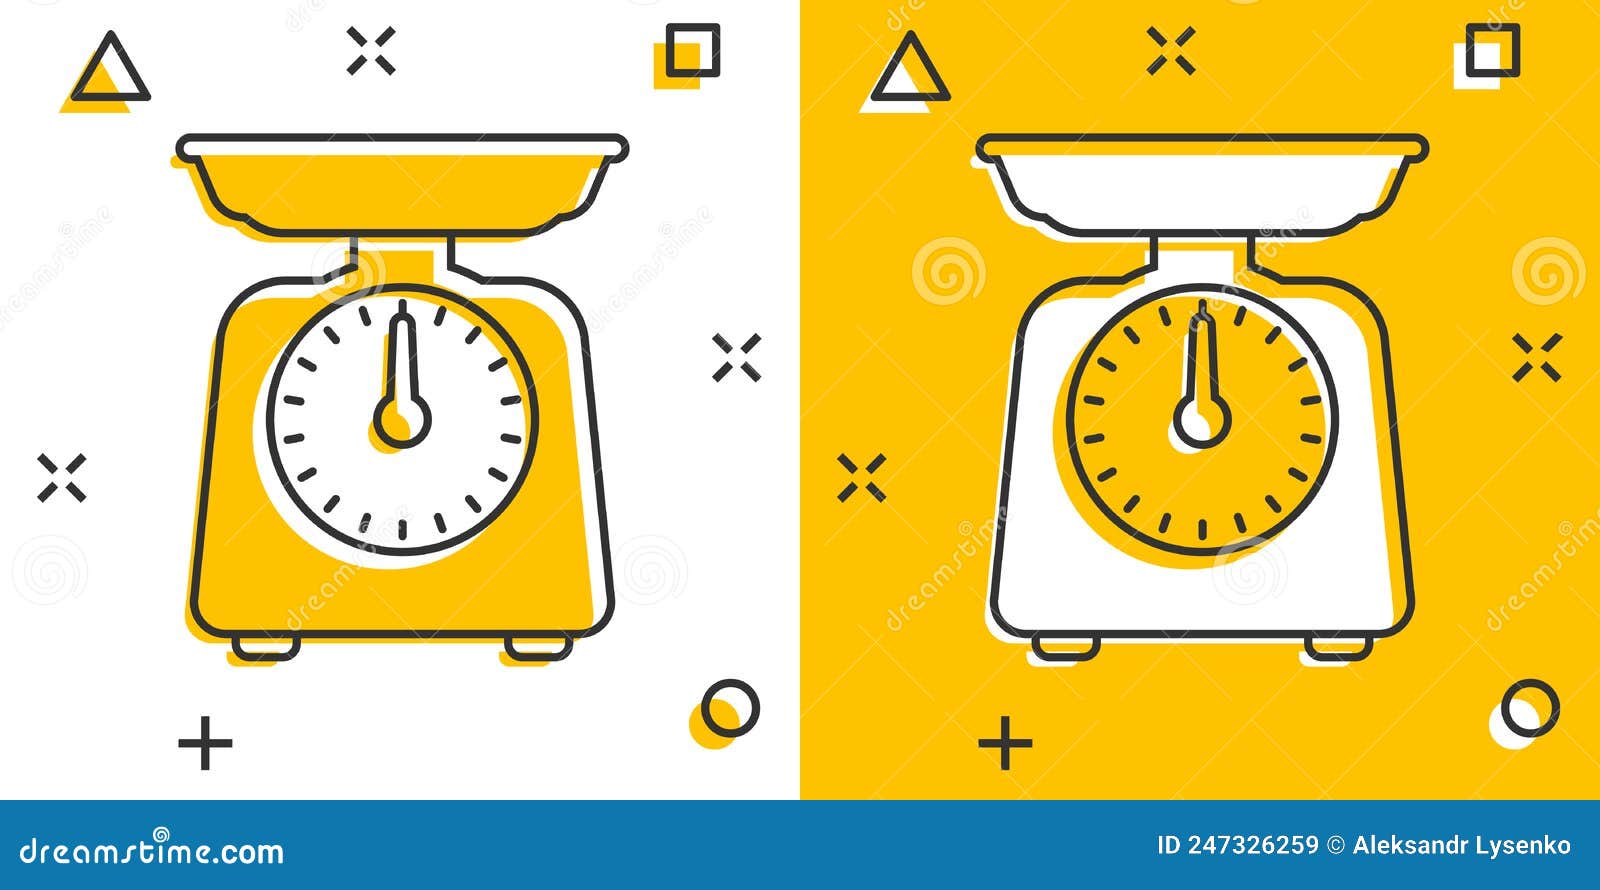 https://thumbs.dreamstime.com/z/bathroom-weight-scale-icon-comic-style-mass-measurement-cartoon-vector-illustration-isolated-background-overweight-splash-247326259.jpg